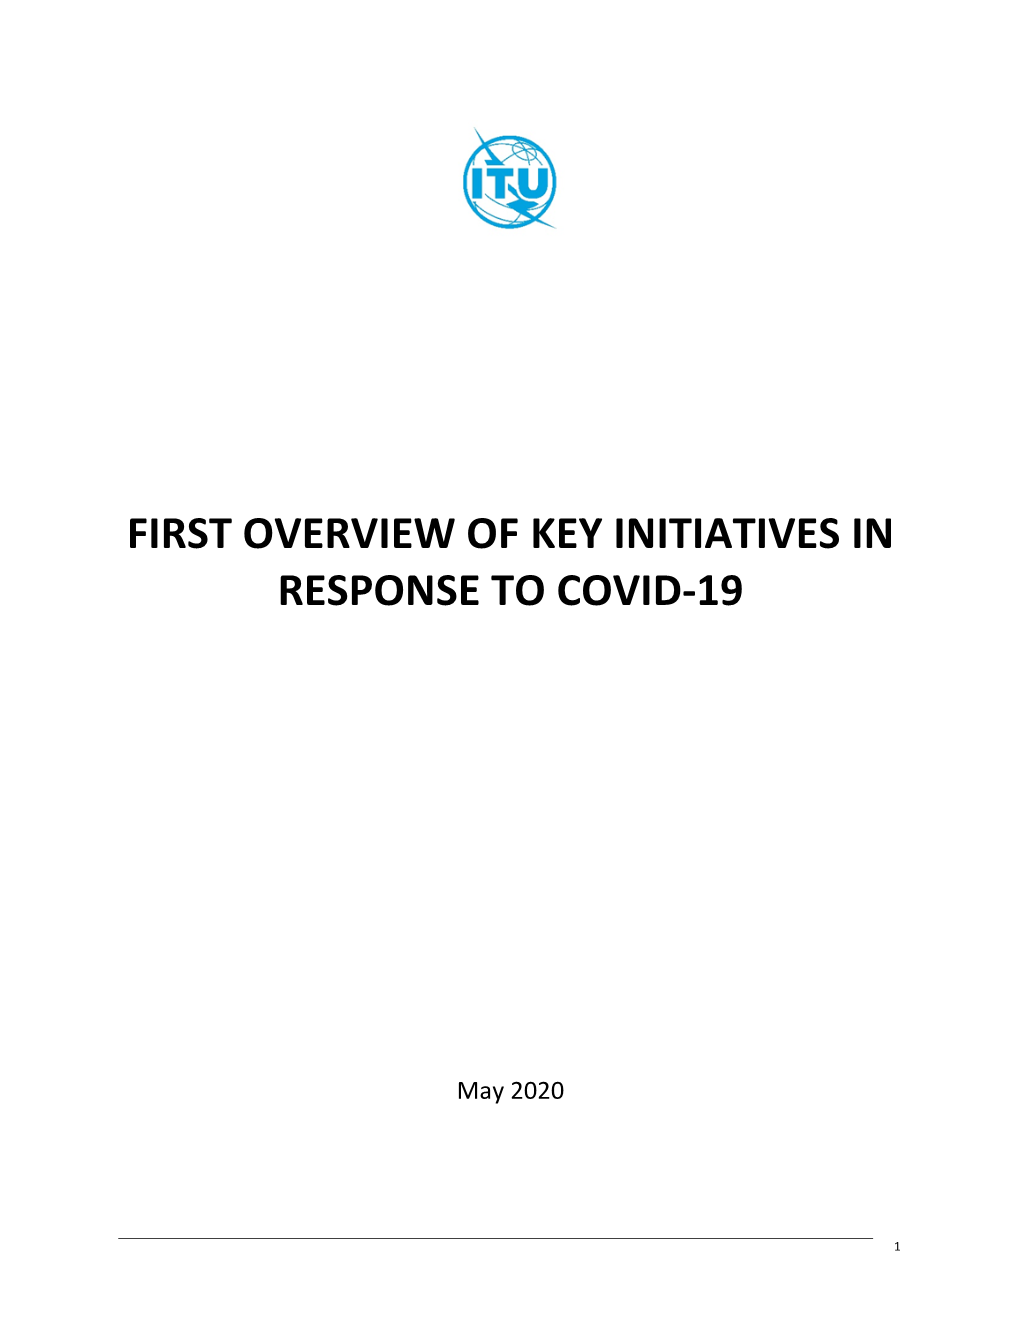 First Overview of Key Initiatives in Response to Covid-19